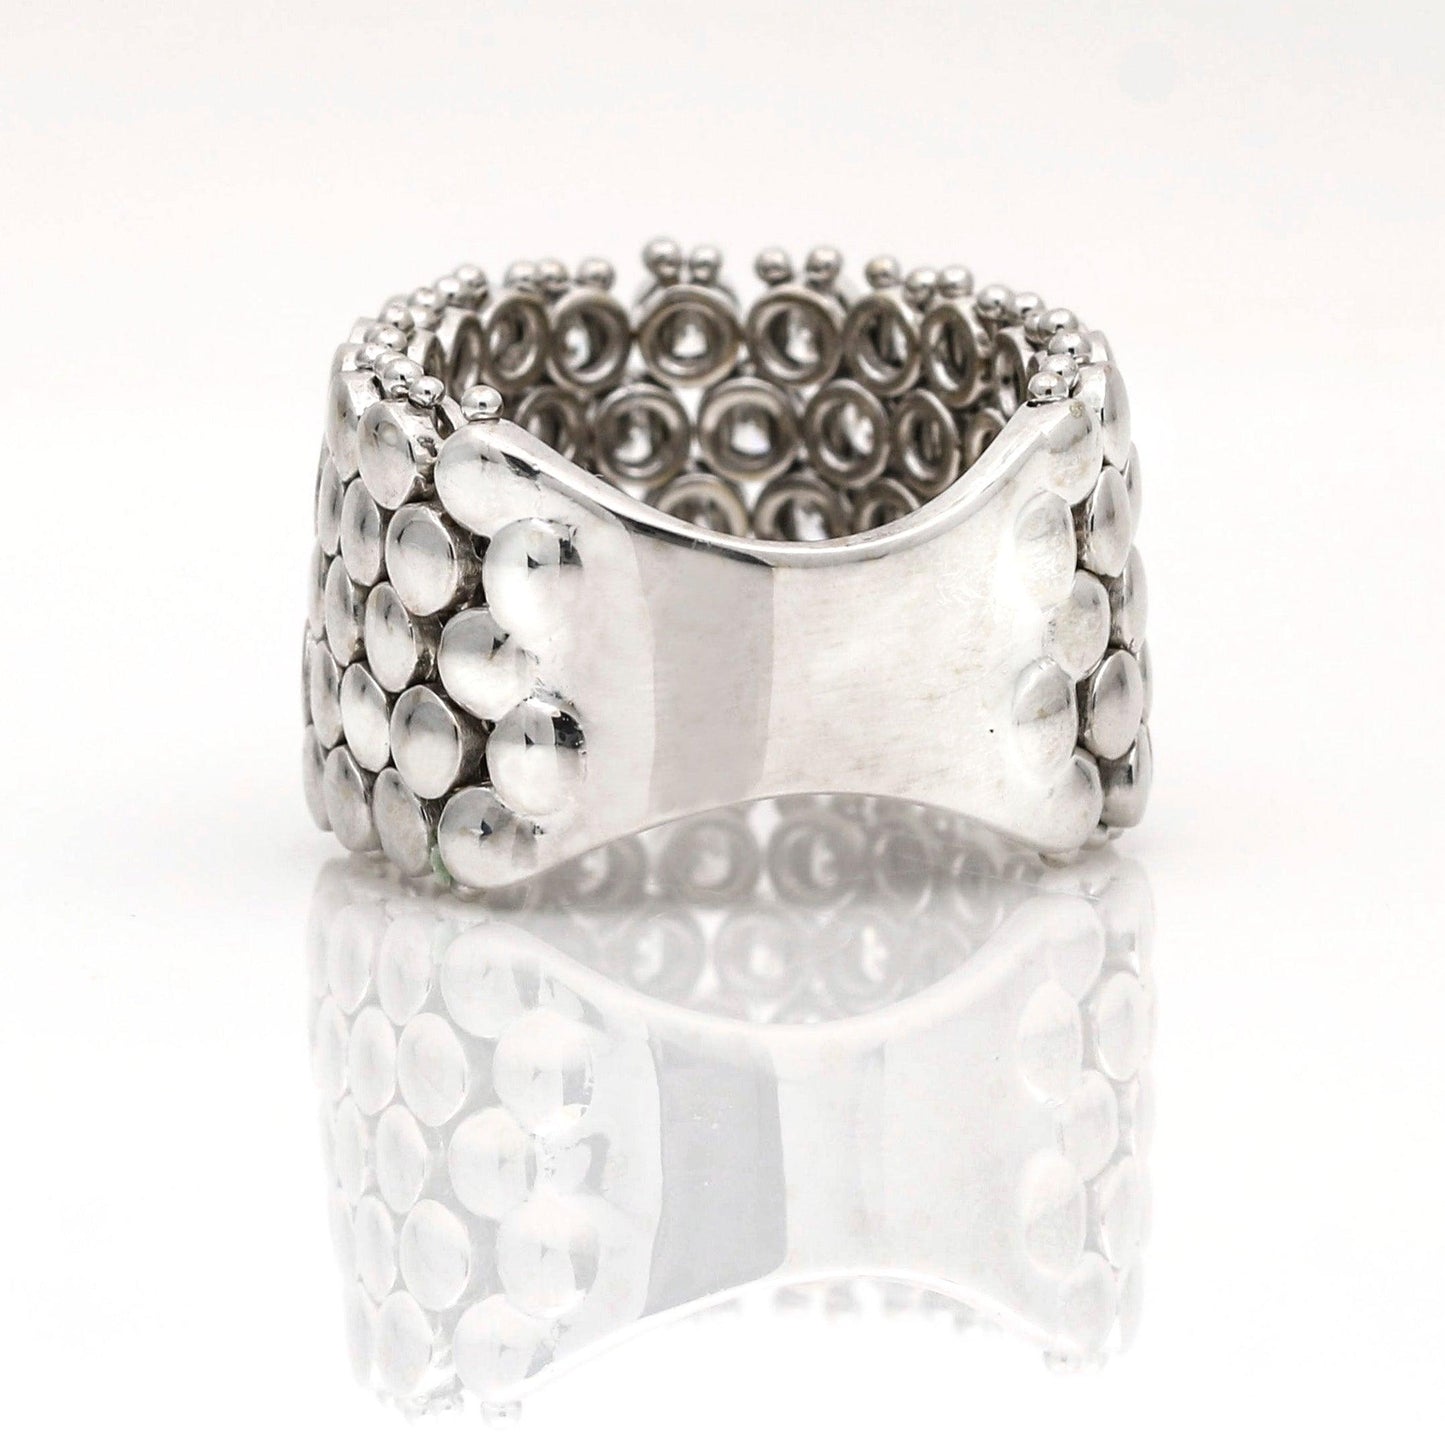 Birks Diamond Mesh Wide Band Ring in 18k White Gold - 31 Jewels Inc.